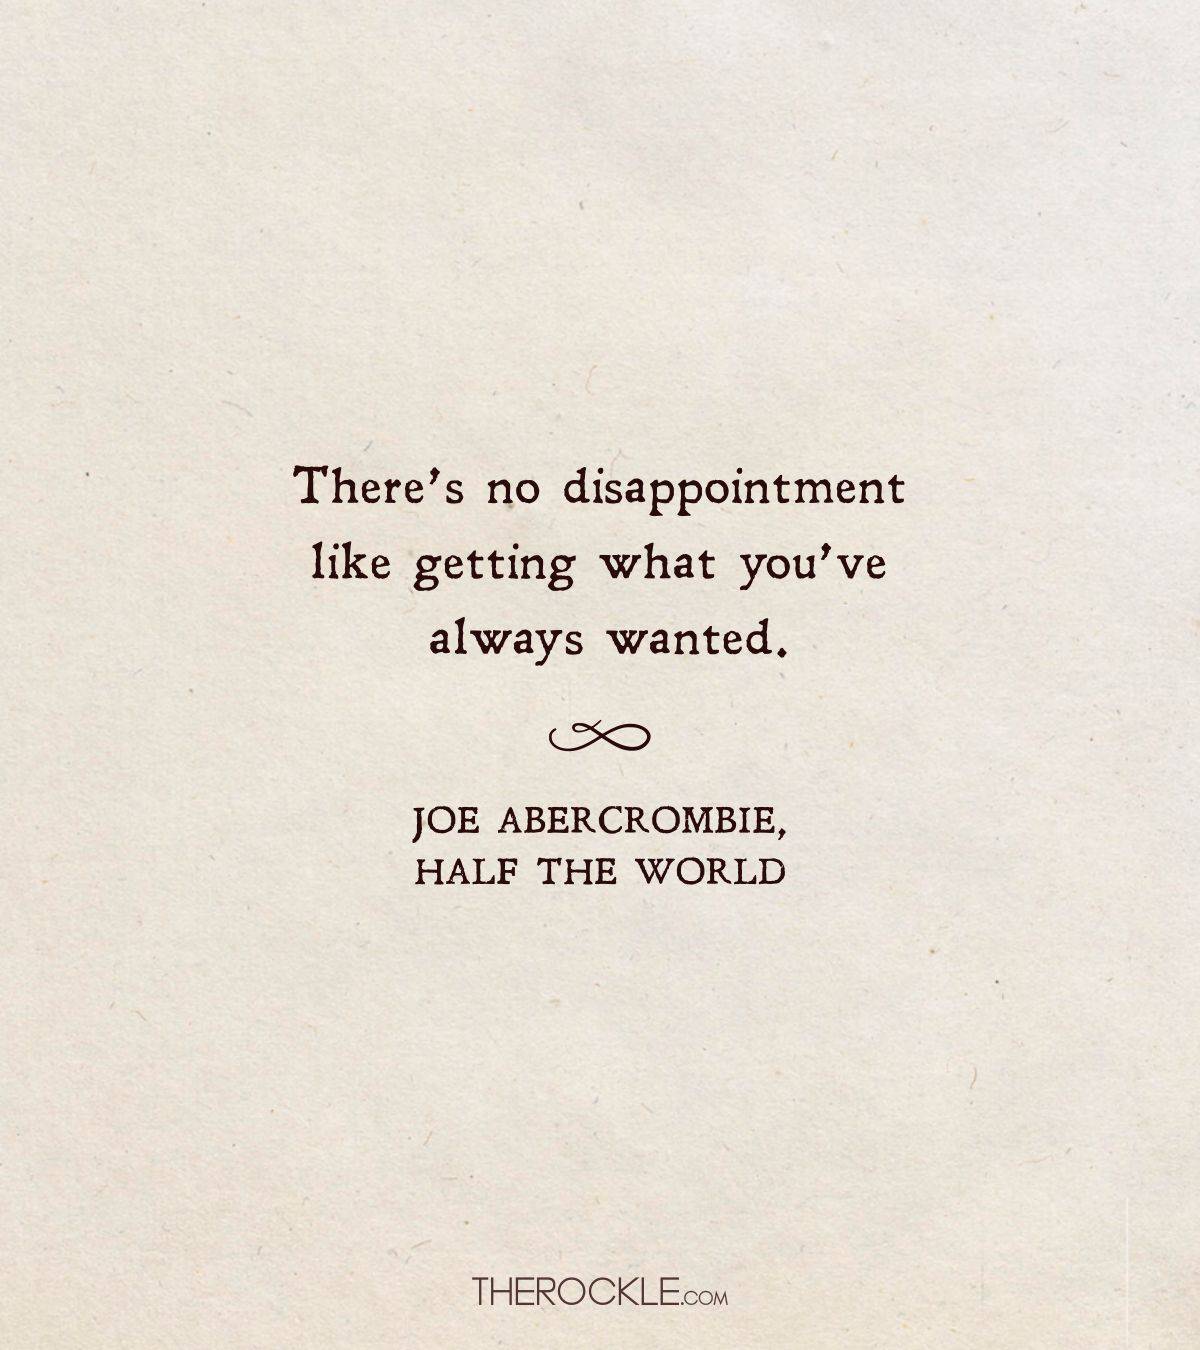 funny take on disappointment by Joe Abercrombie 